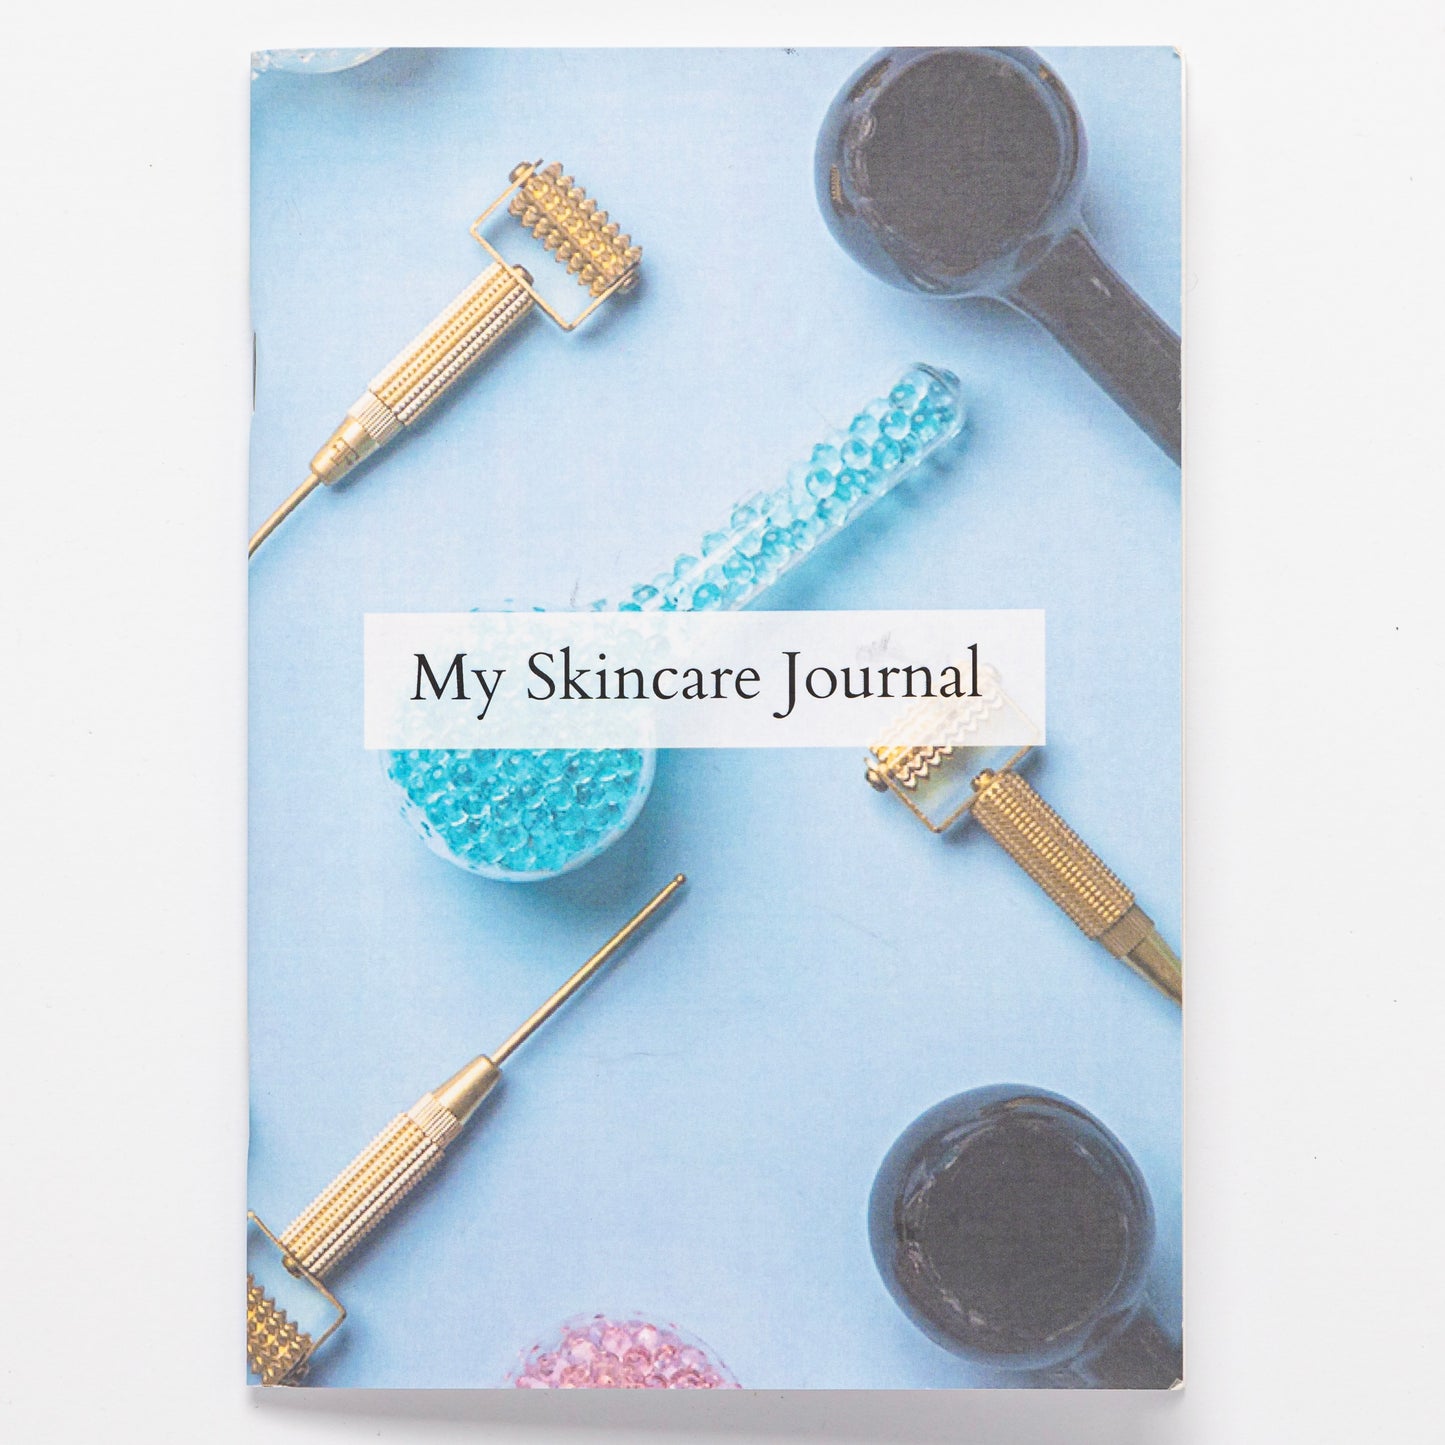 The Skincare Journal